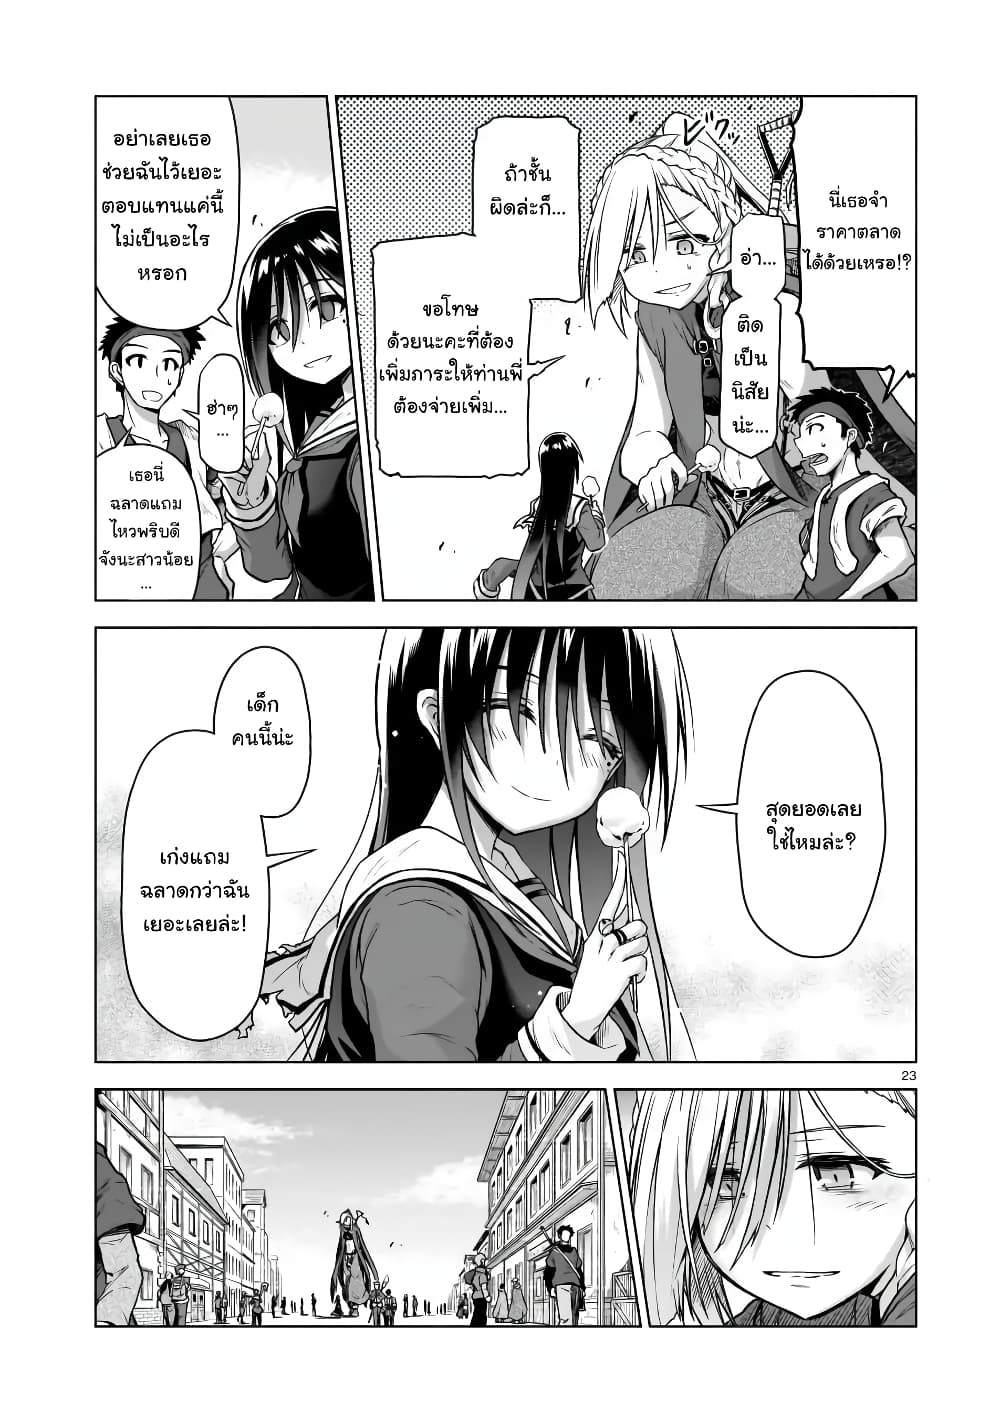 The Onee-sama and the Giant 3-3